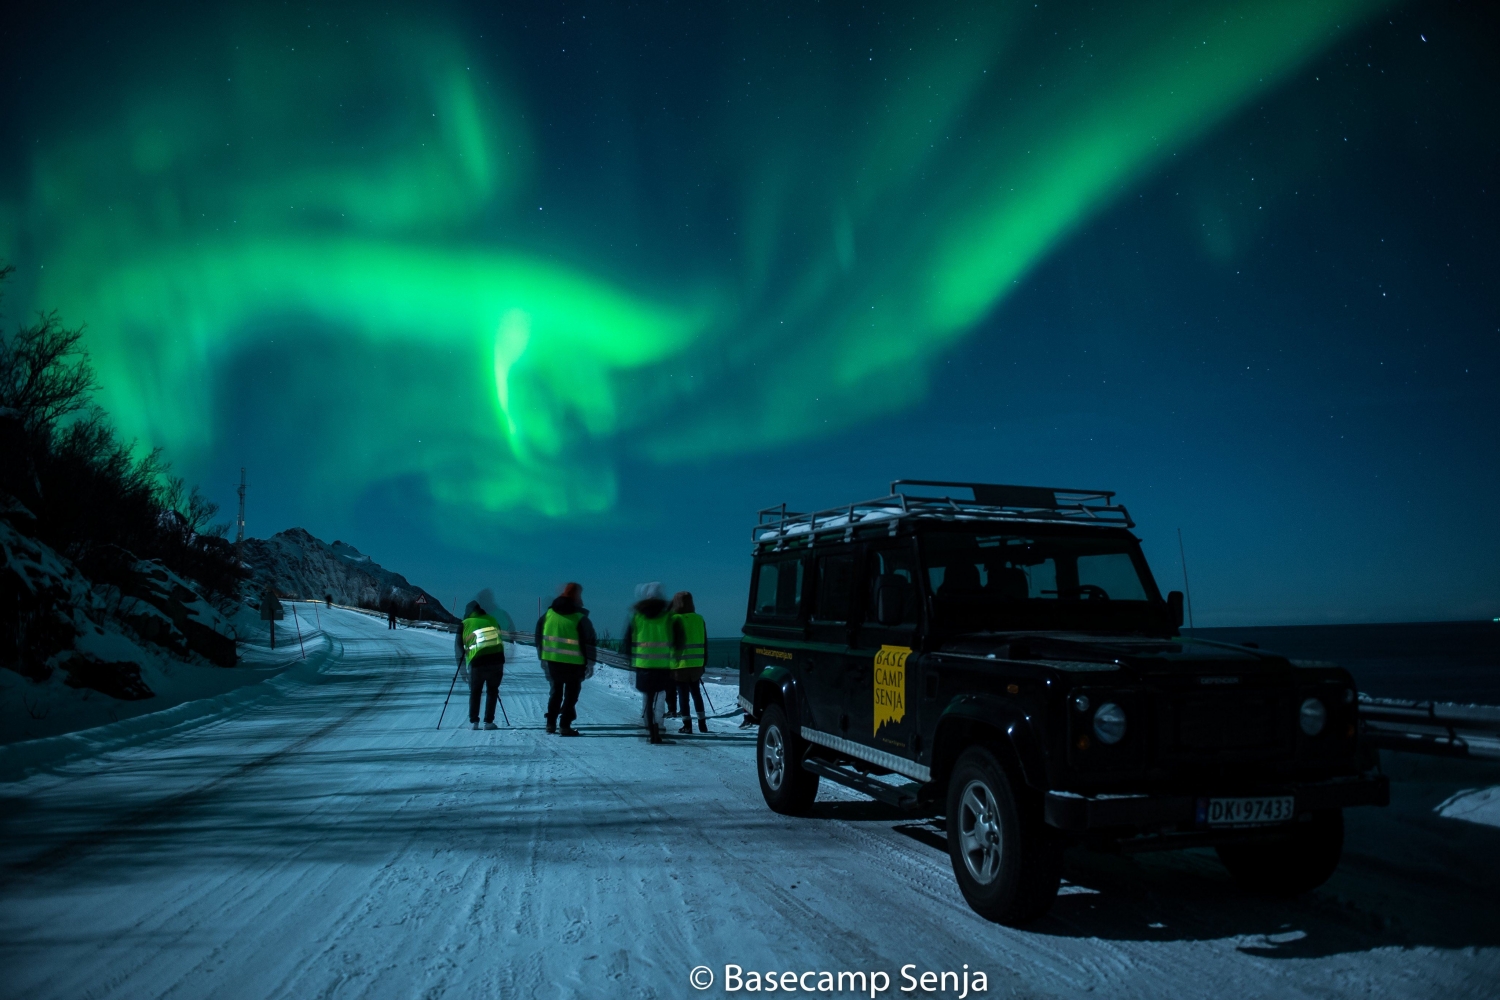 A truck parked on a snowy road with people and Northern Lights in the background